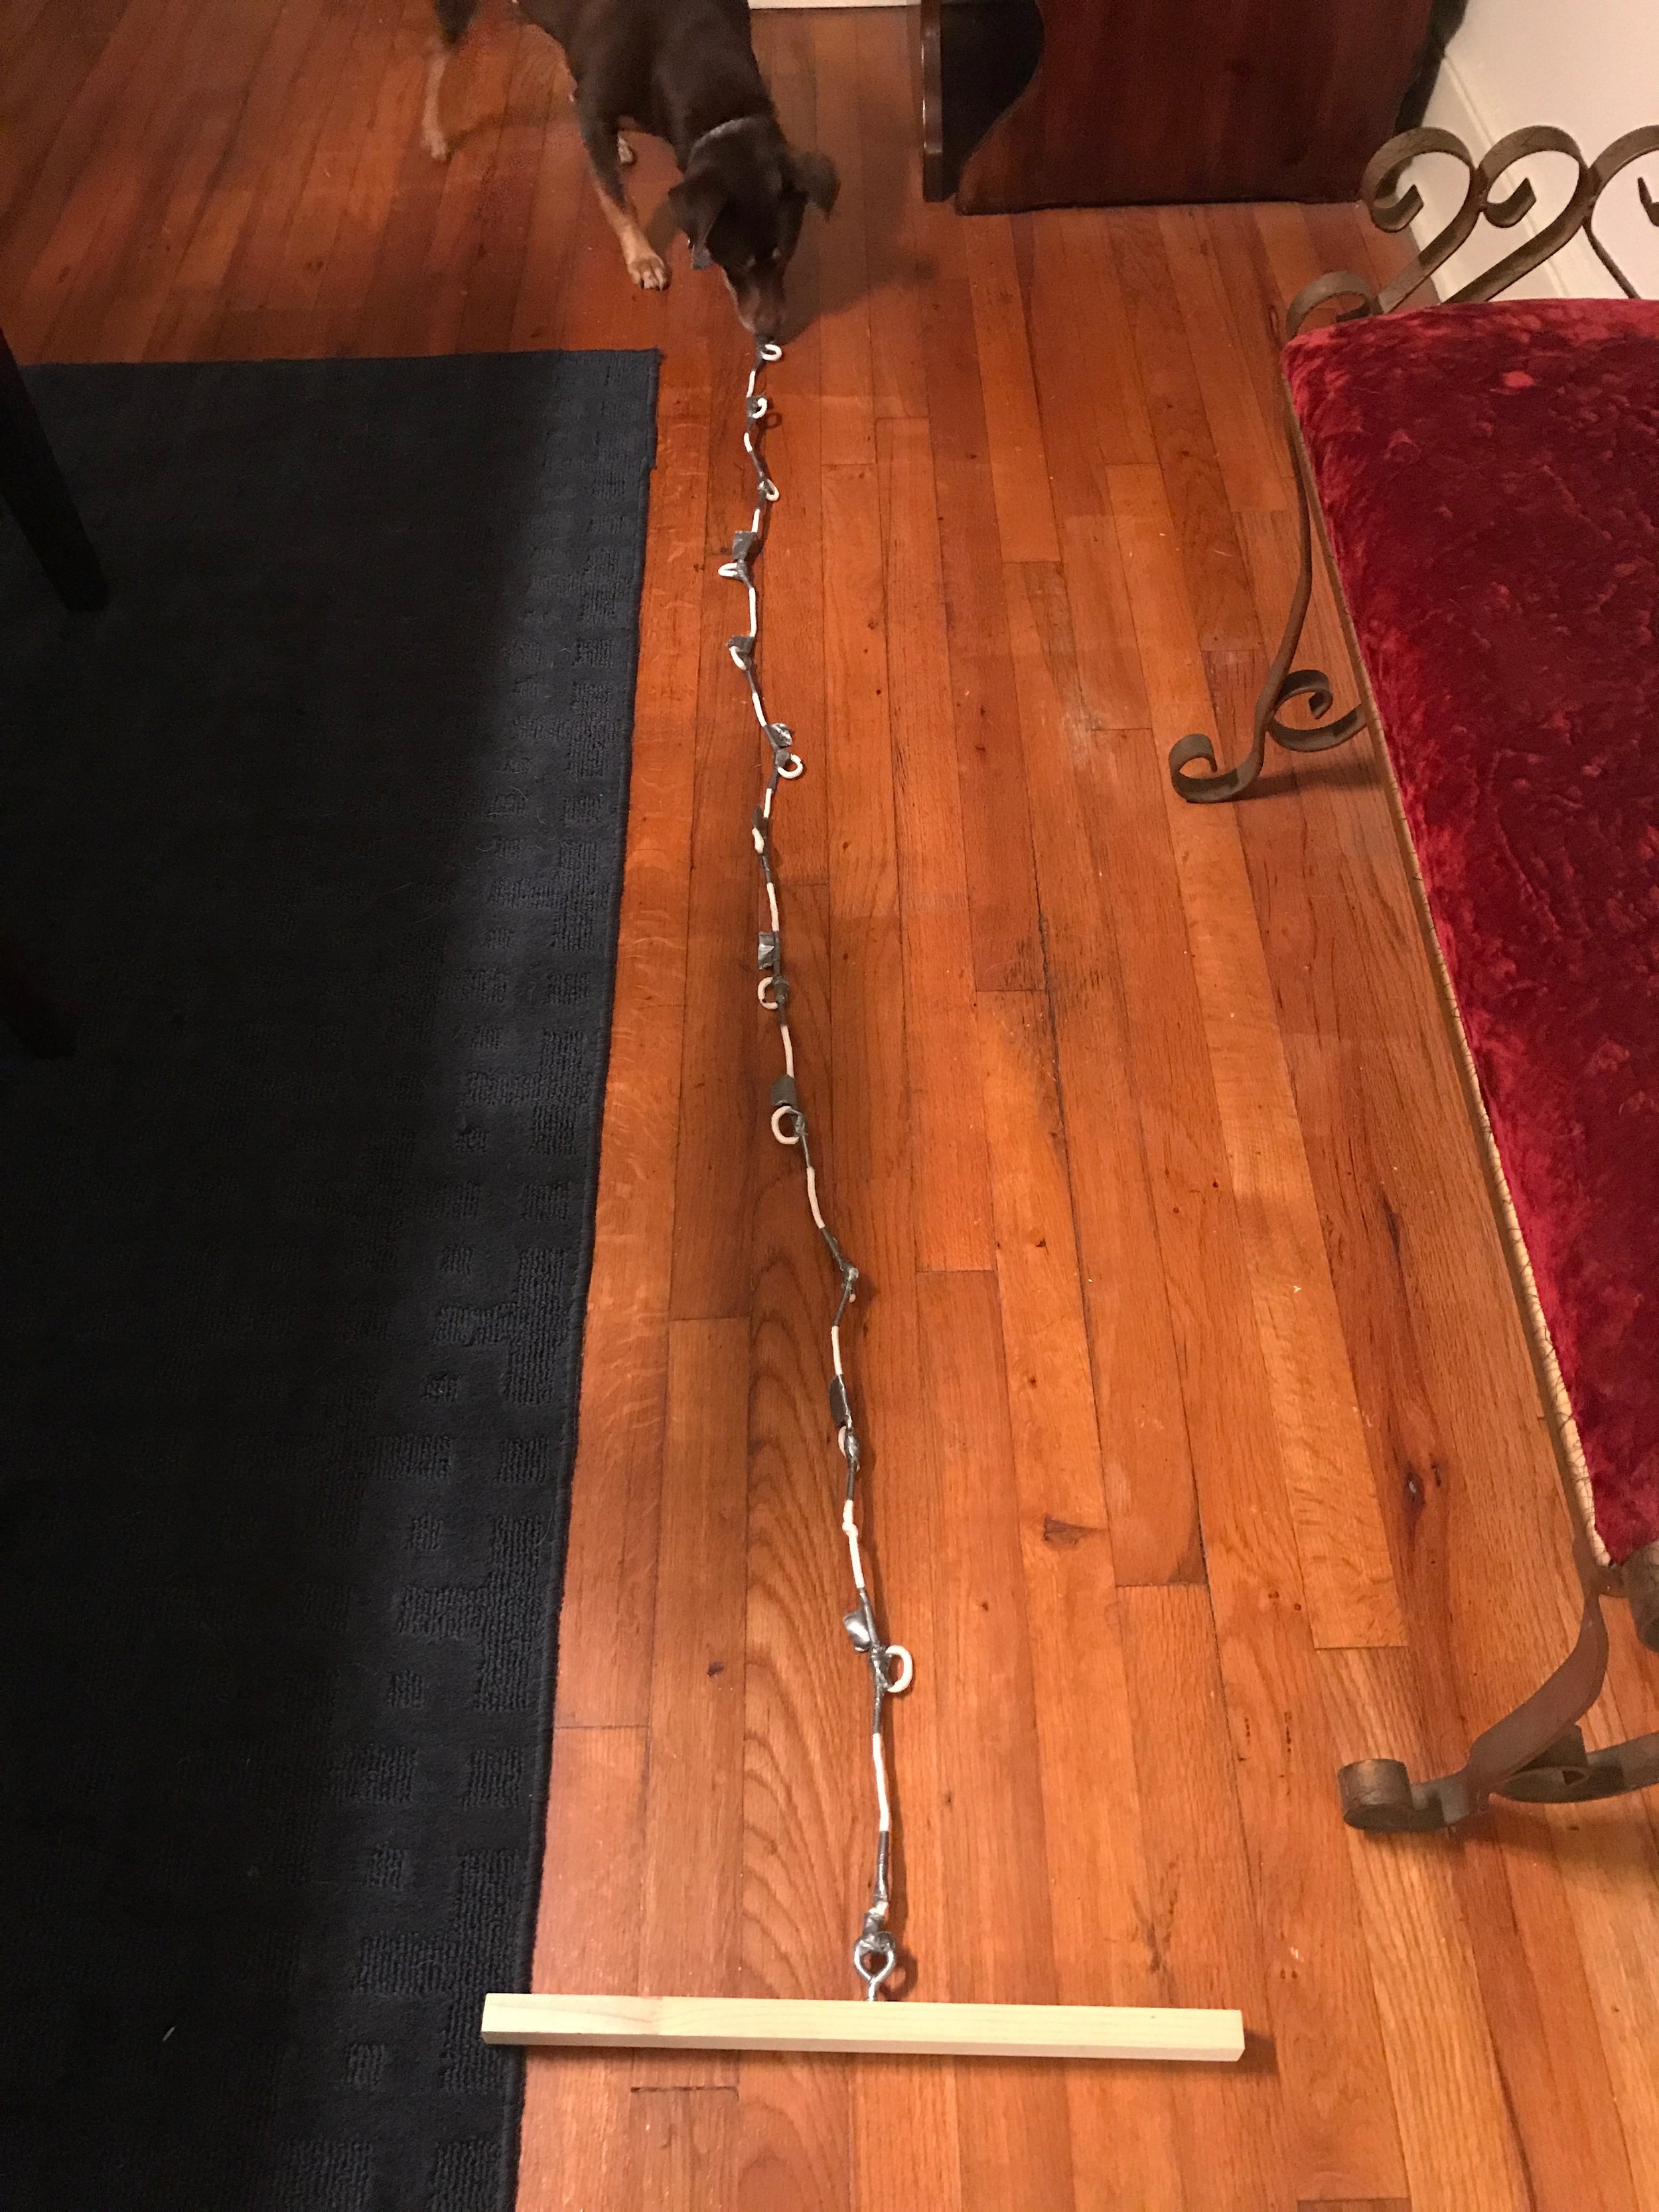  My homemade compass to draw the cogs. Wooden stick, eye hook, laundry line rope, duct tape. 6'7" in total length with marker holders every 6." 